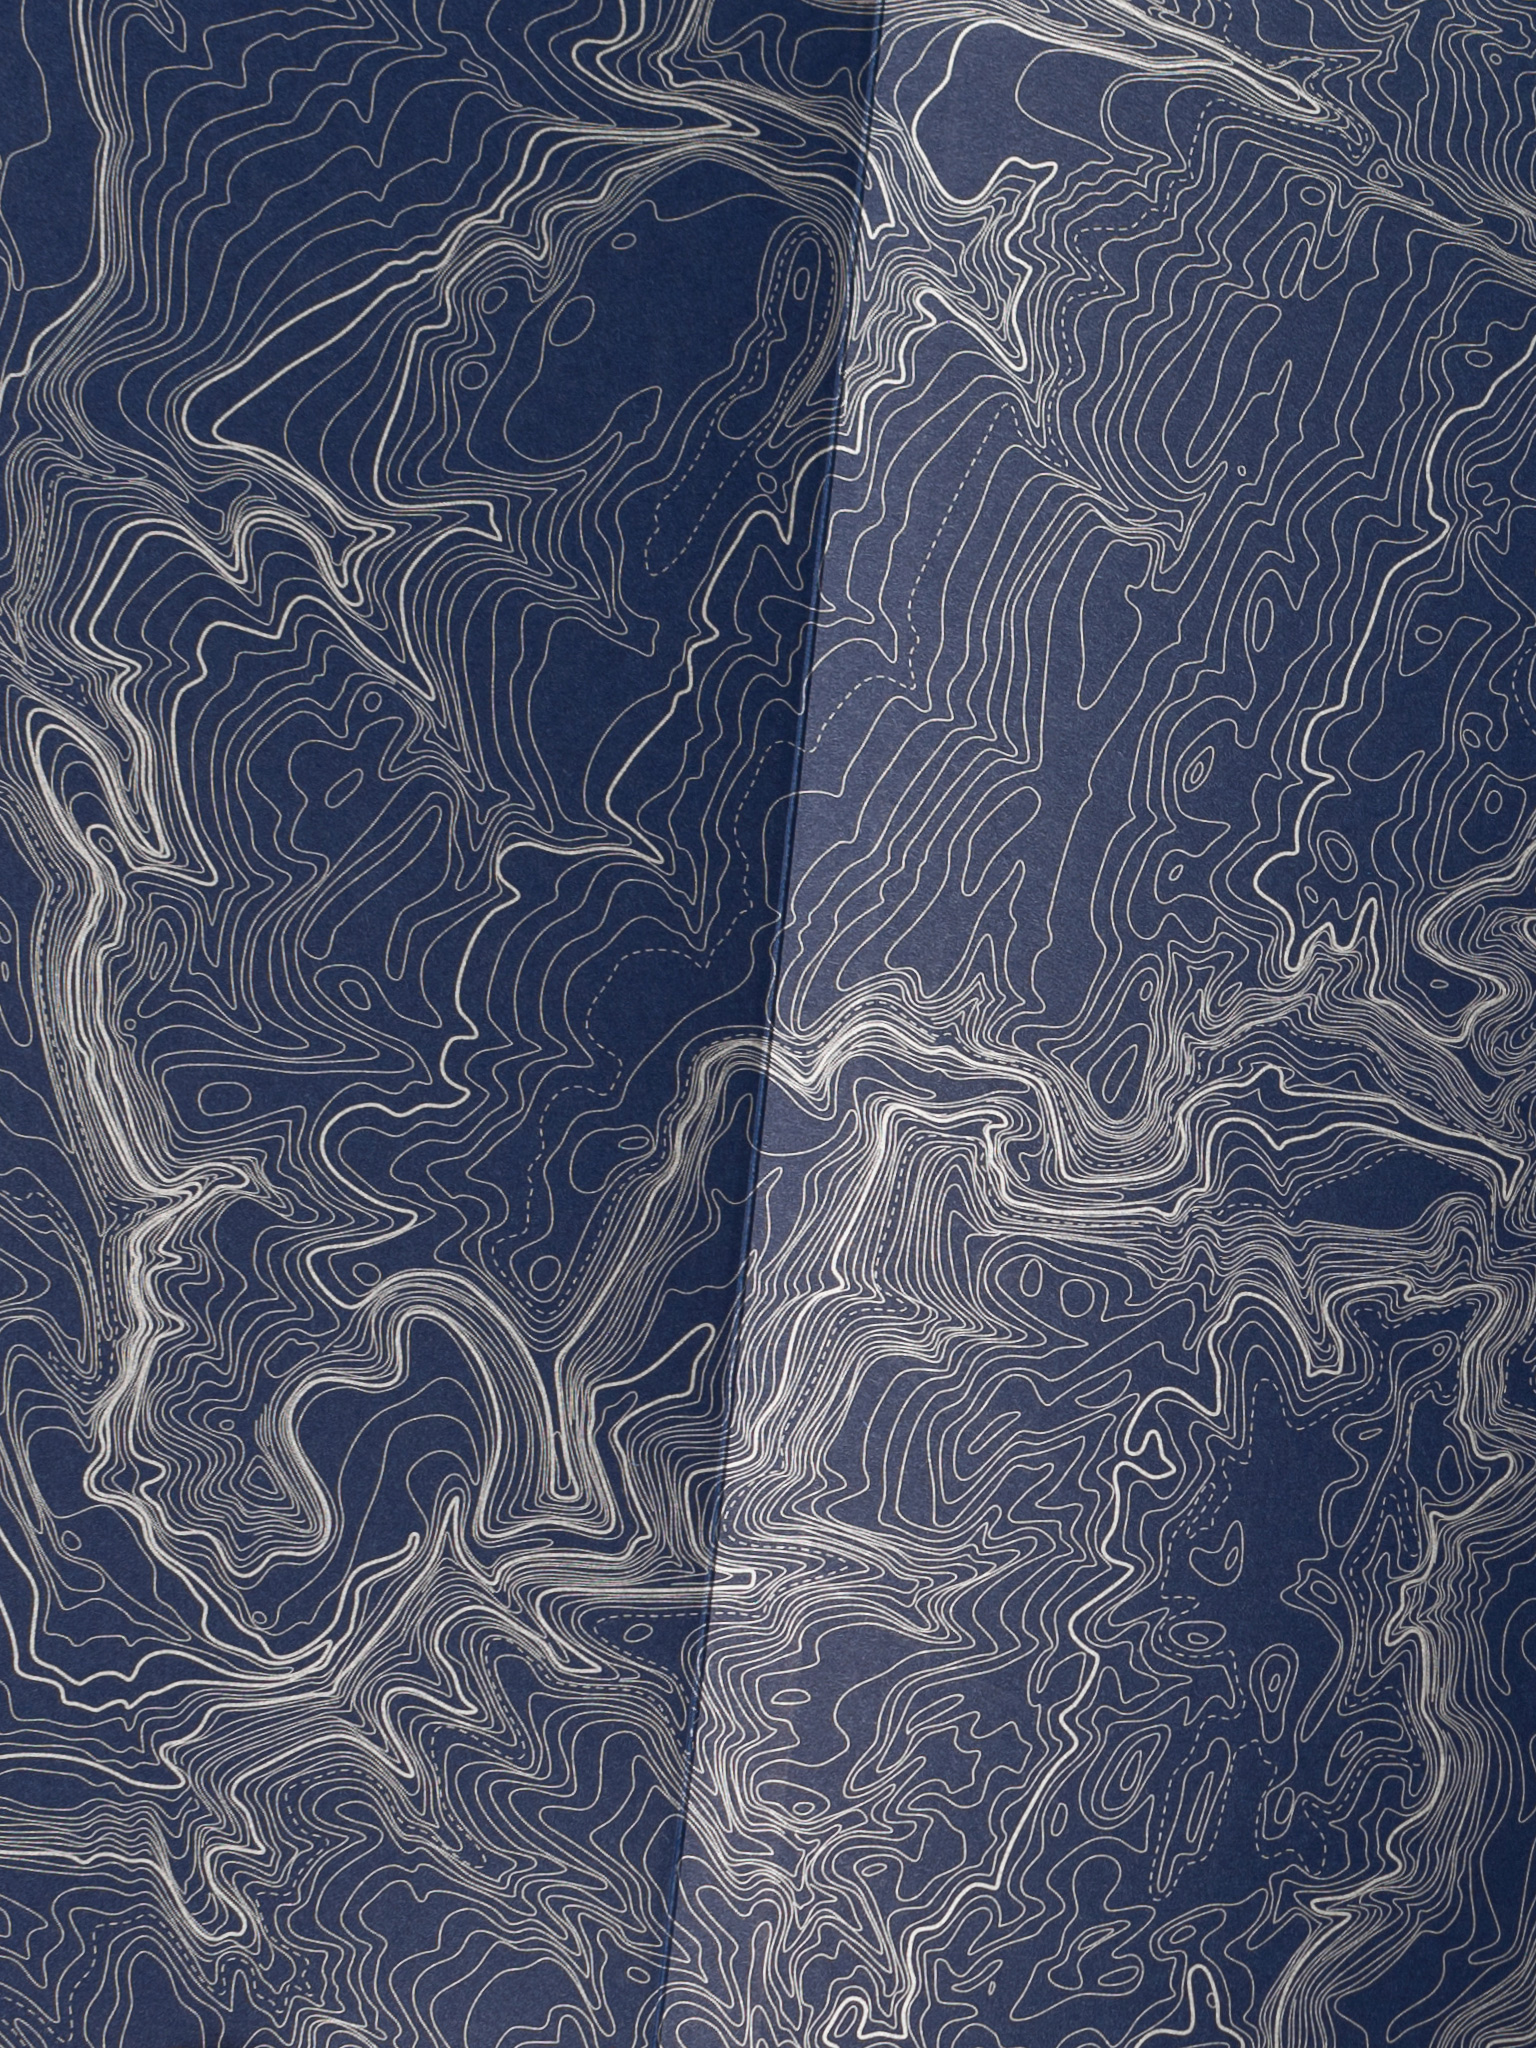 Artistic topography lines.